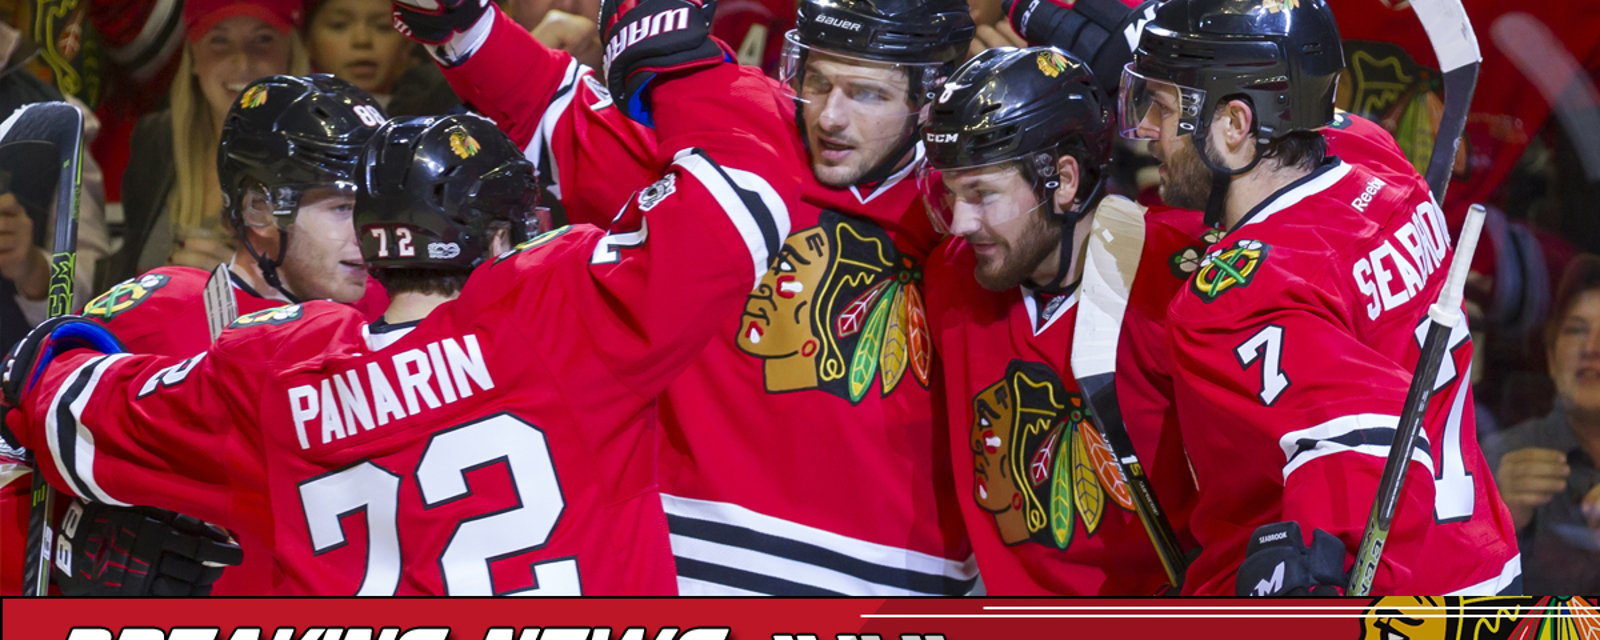 Breaking: Chicago Blackhawks defenseman has signed a 1-year extension.